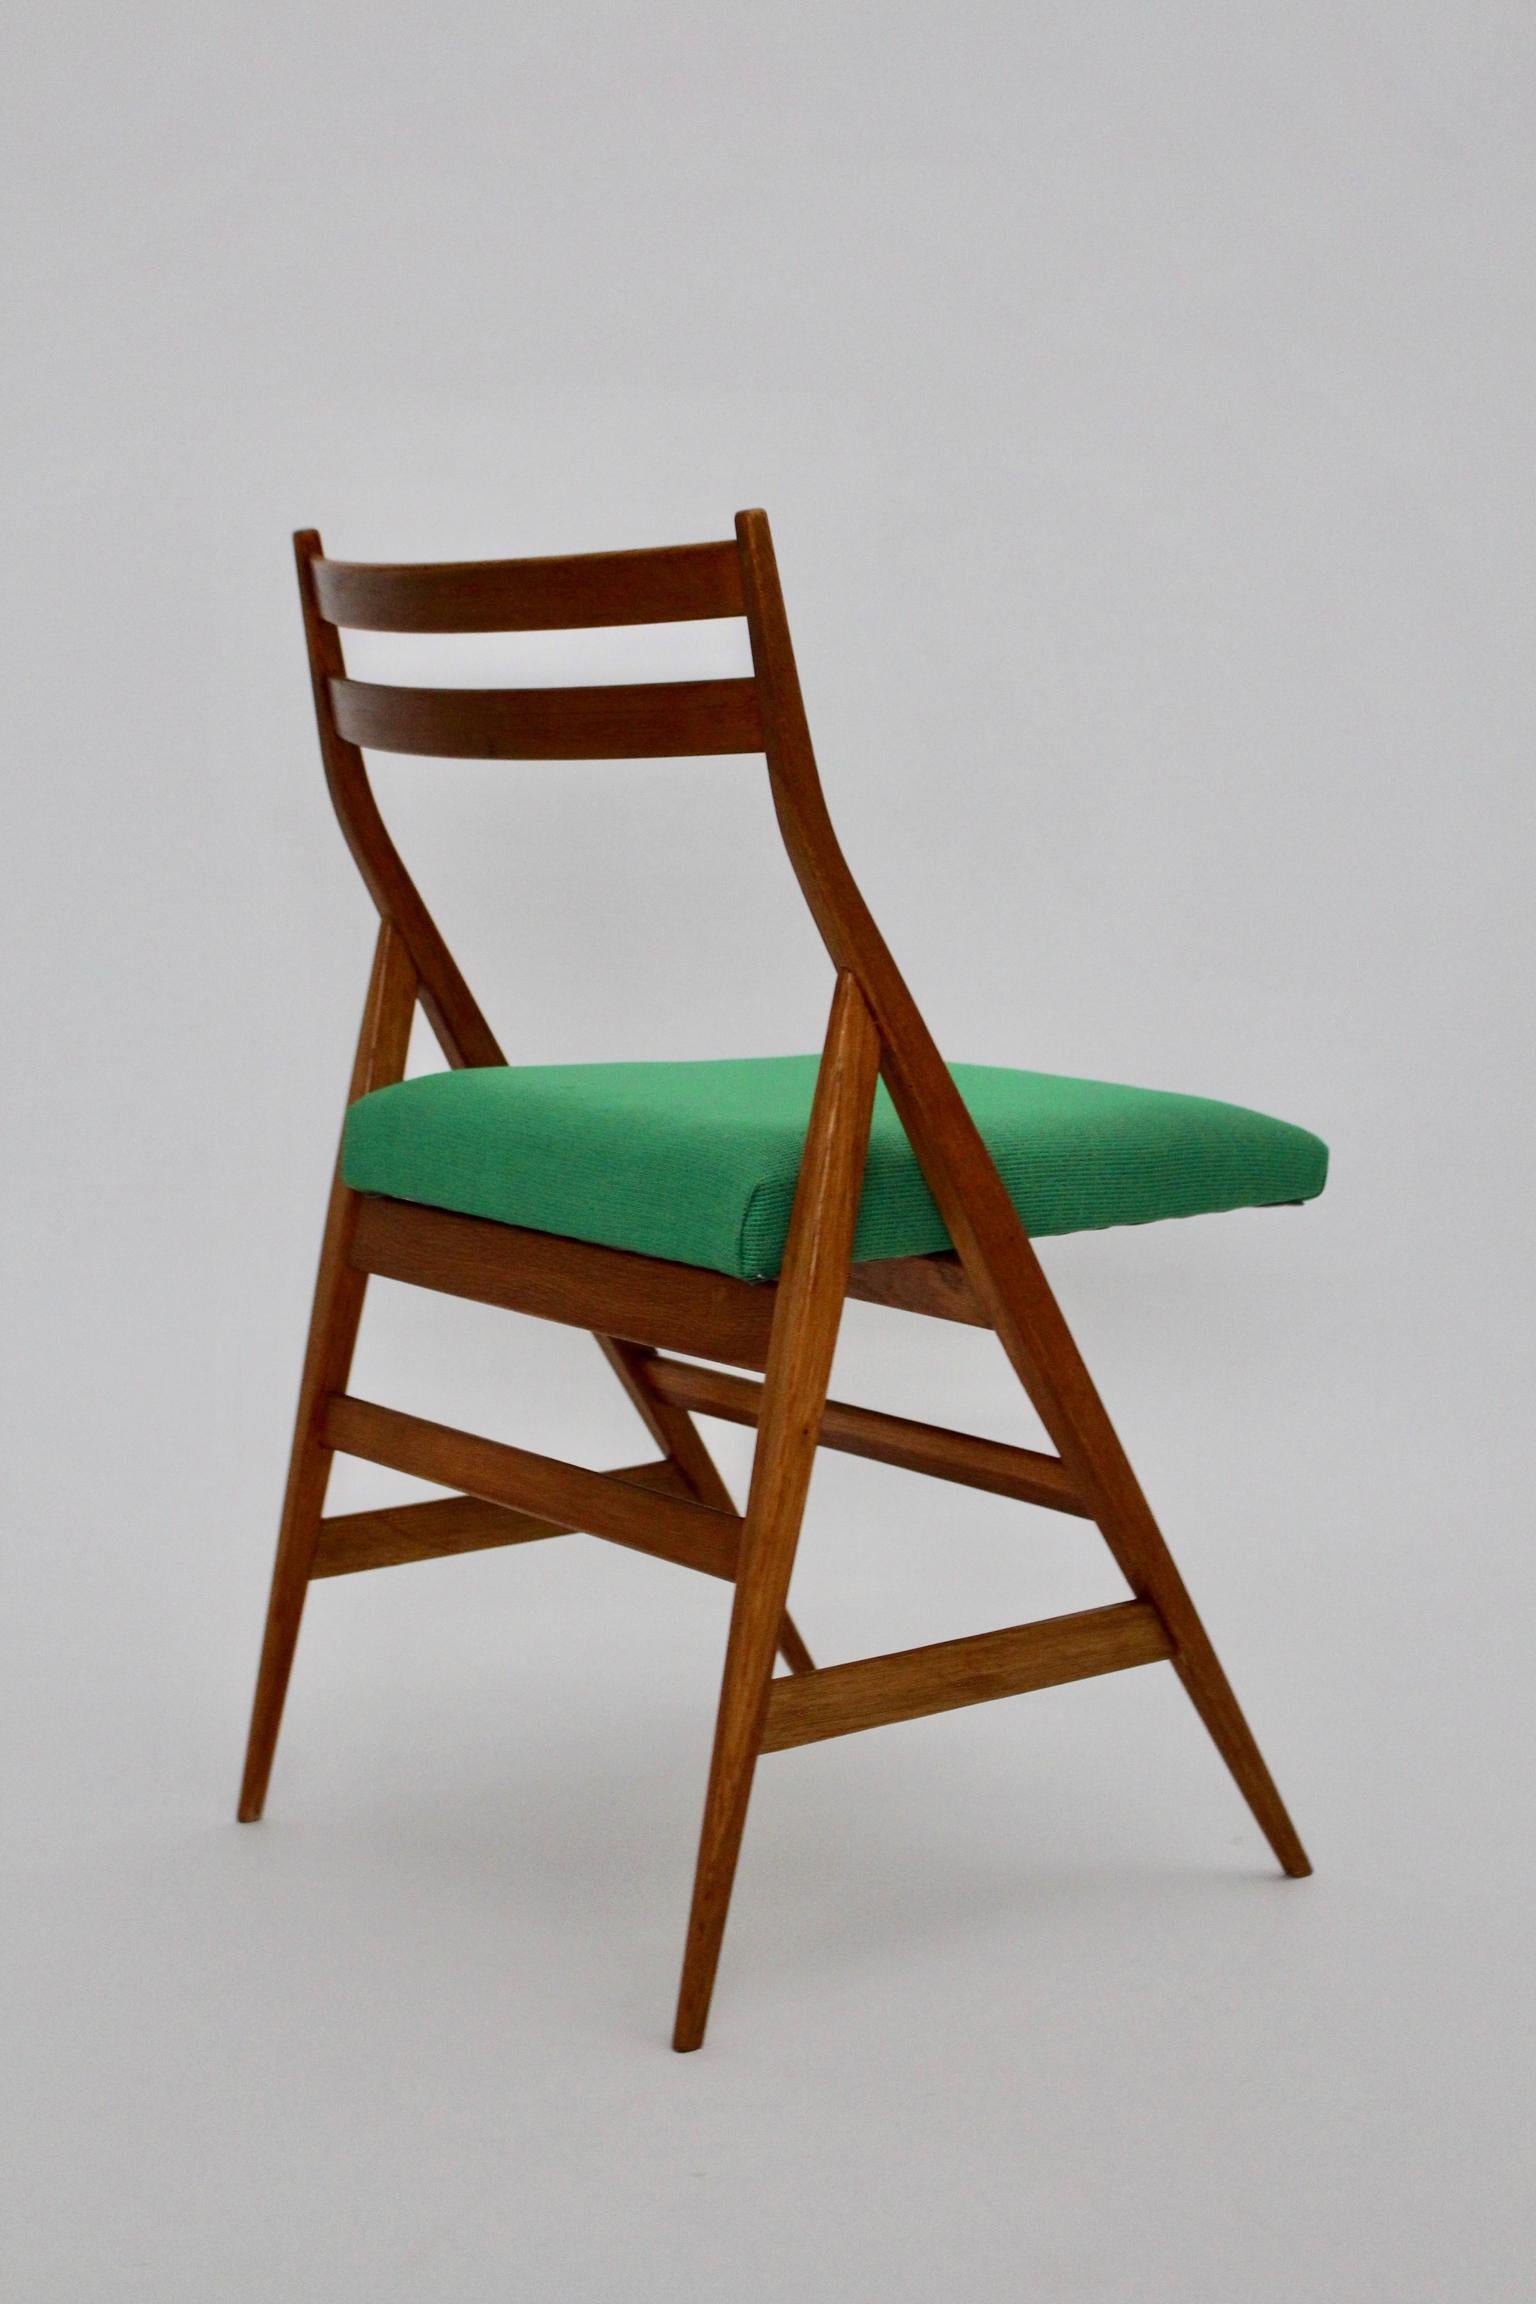 Mid-Century Modern Vintage Wood Dining Chairs Piero Bottoni Attributed, Italy For Sale 7